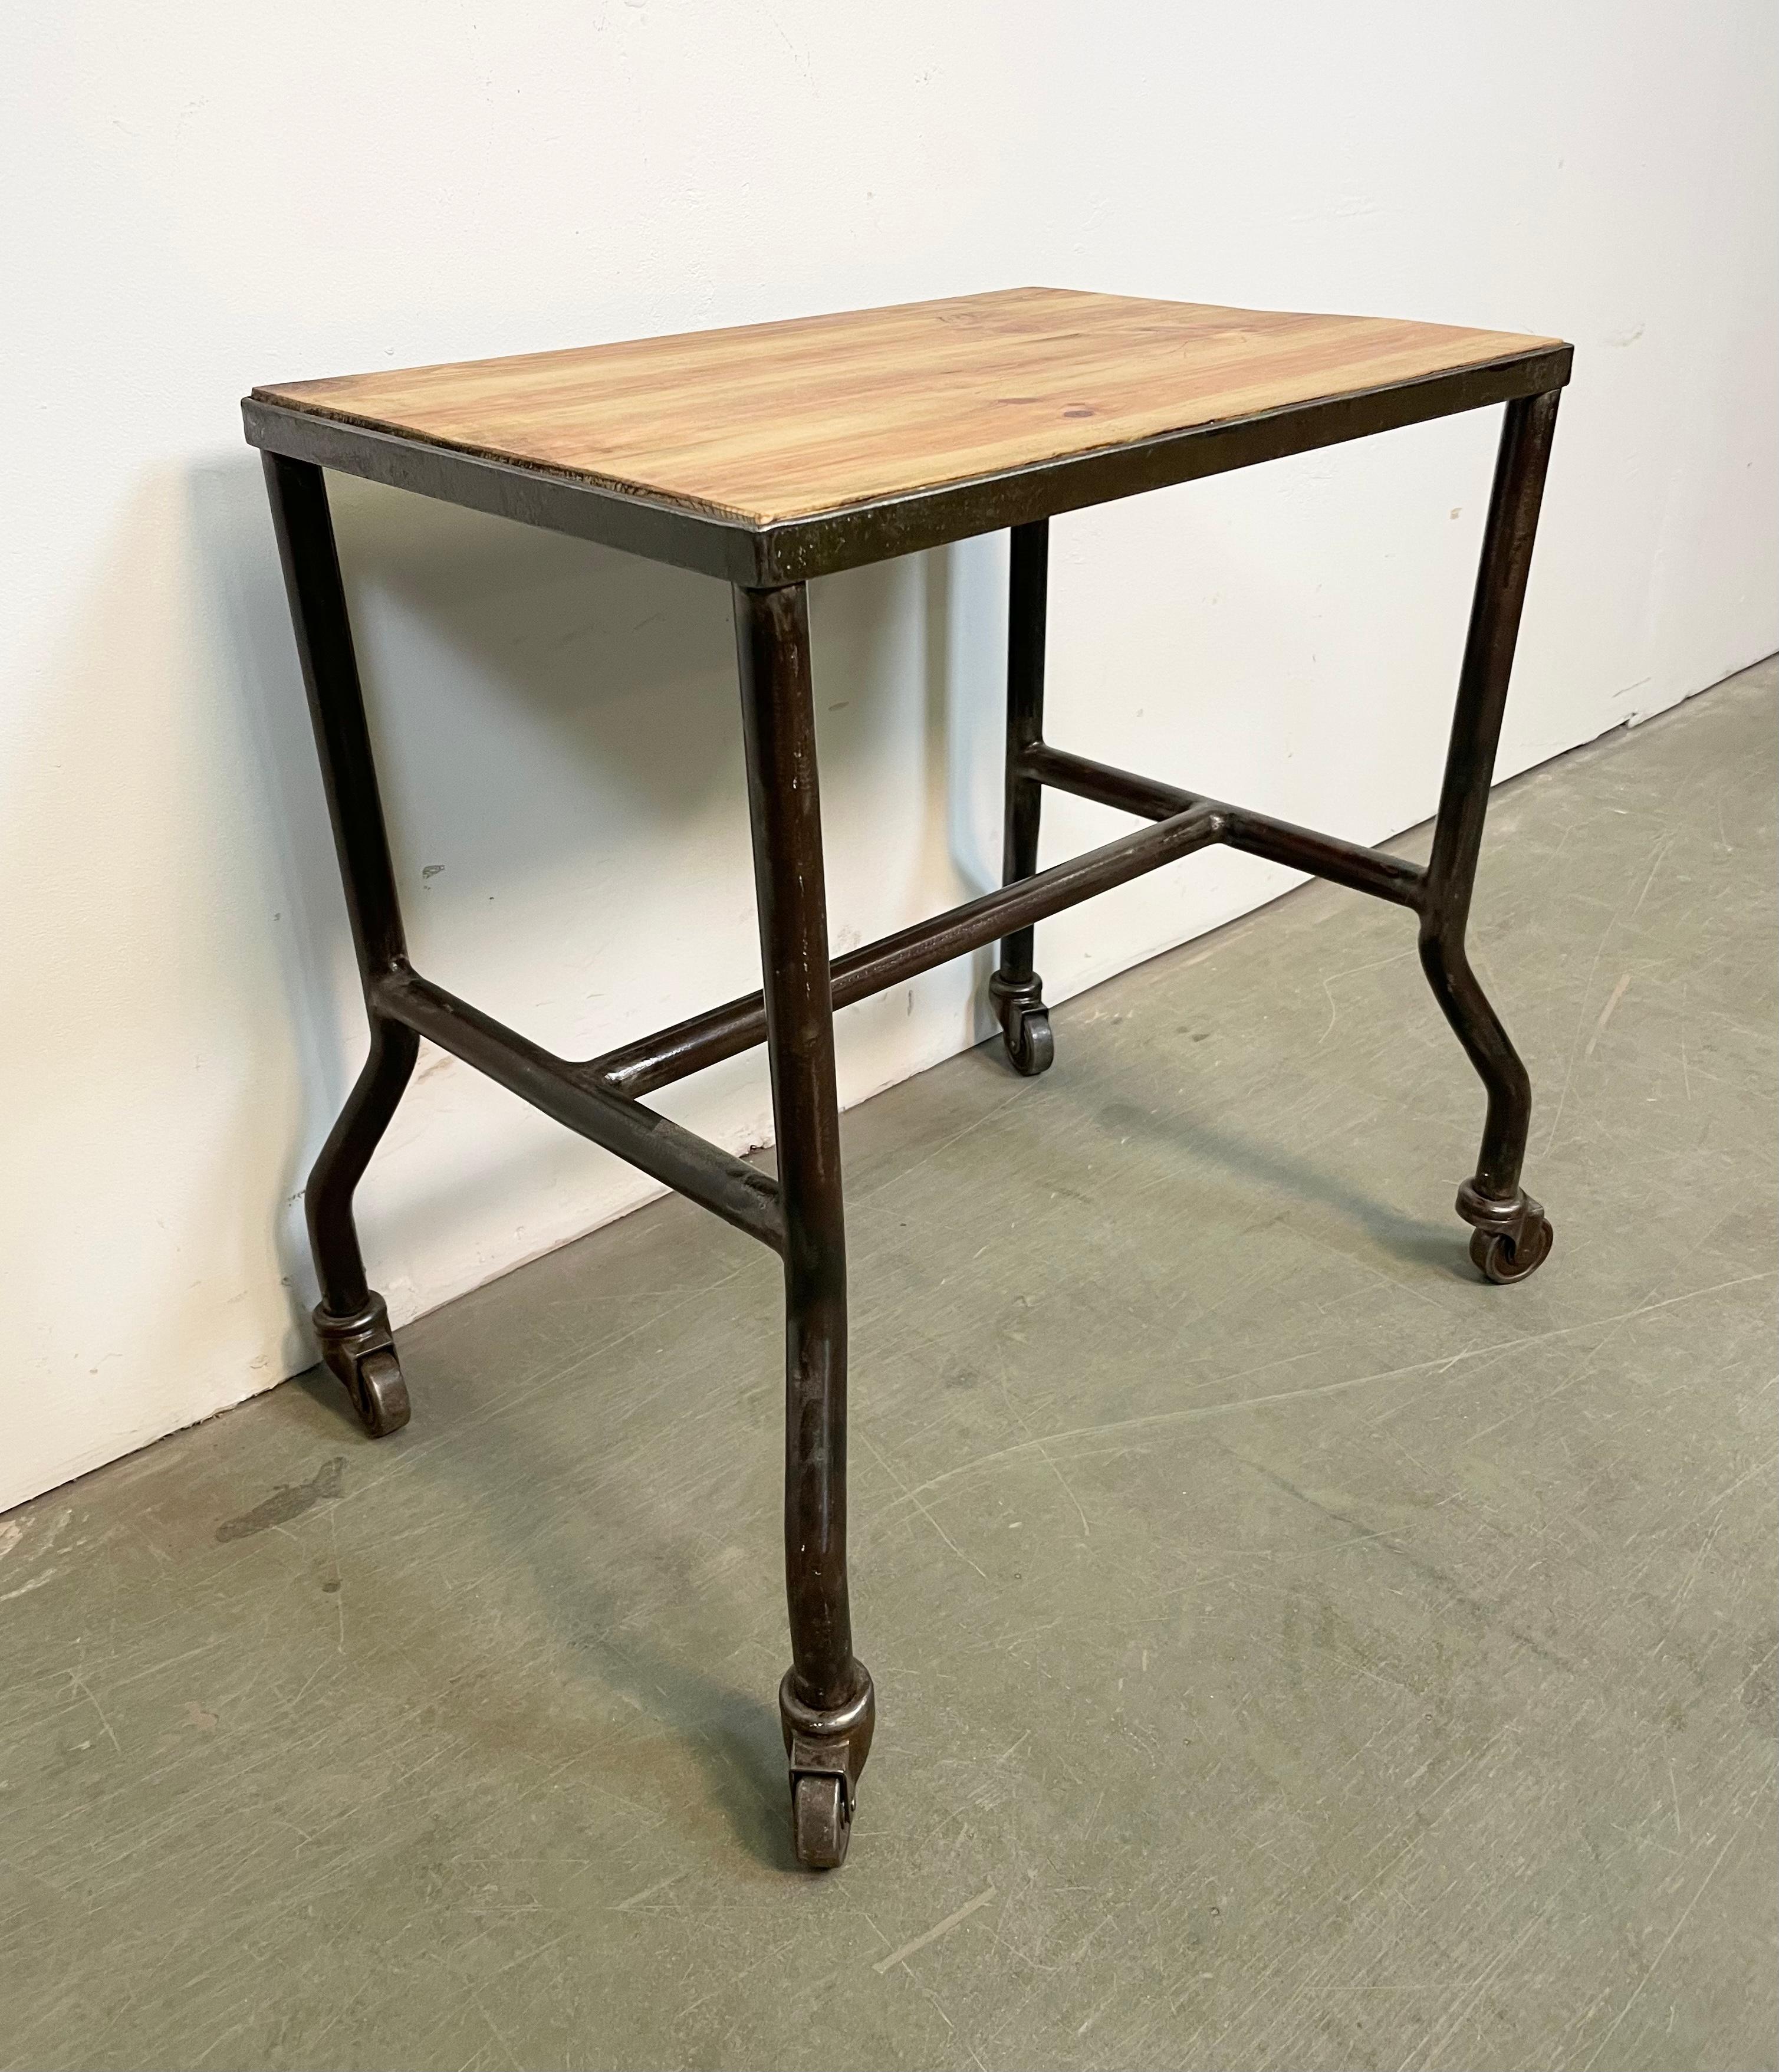 Czech Industrial Table on Wheels, 1960s For Sale